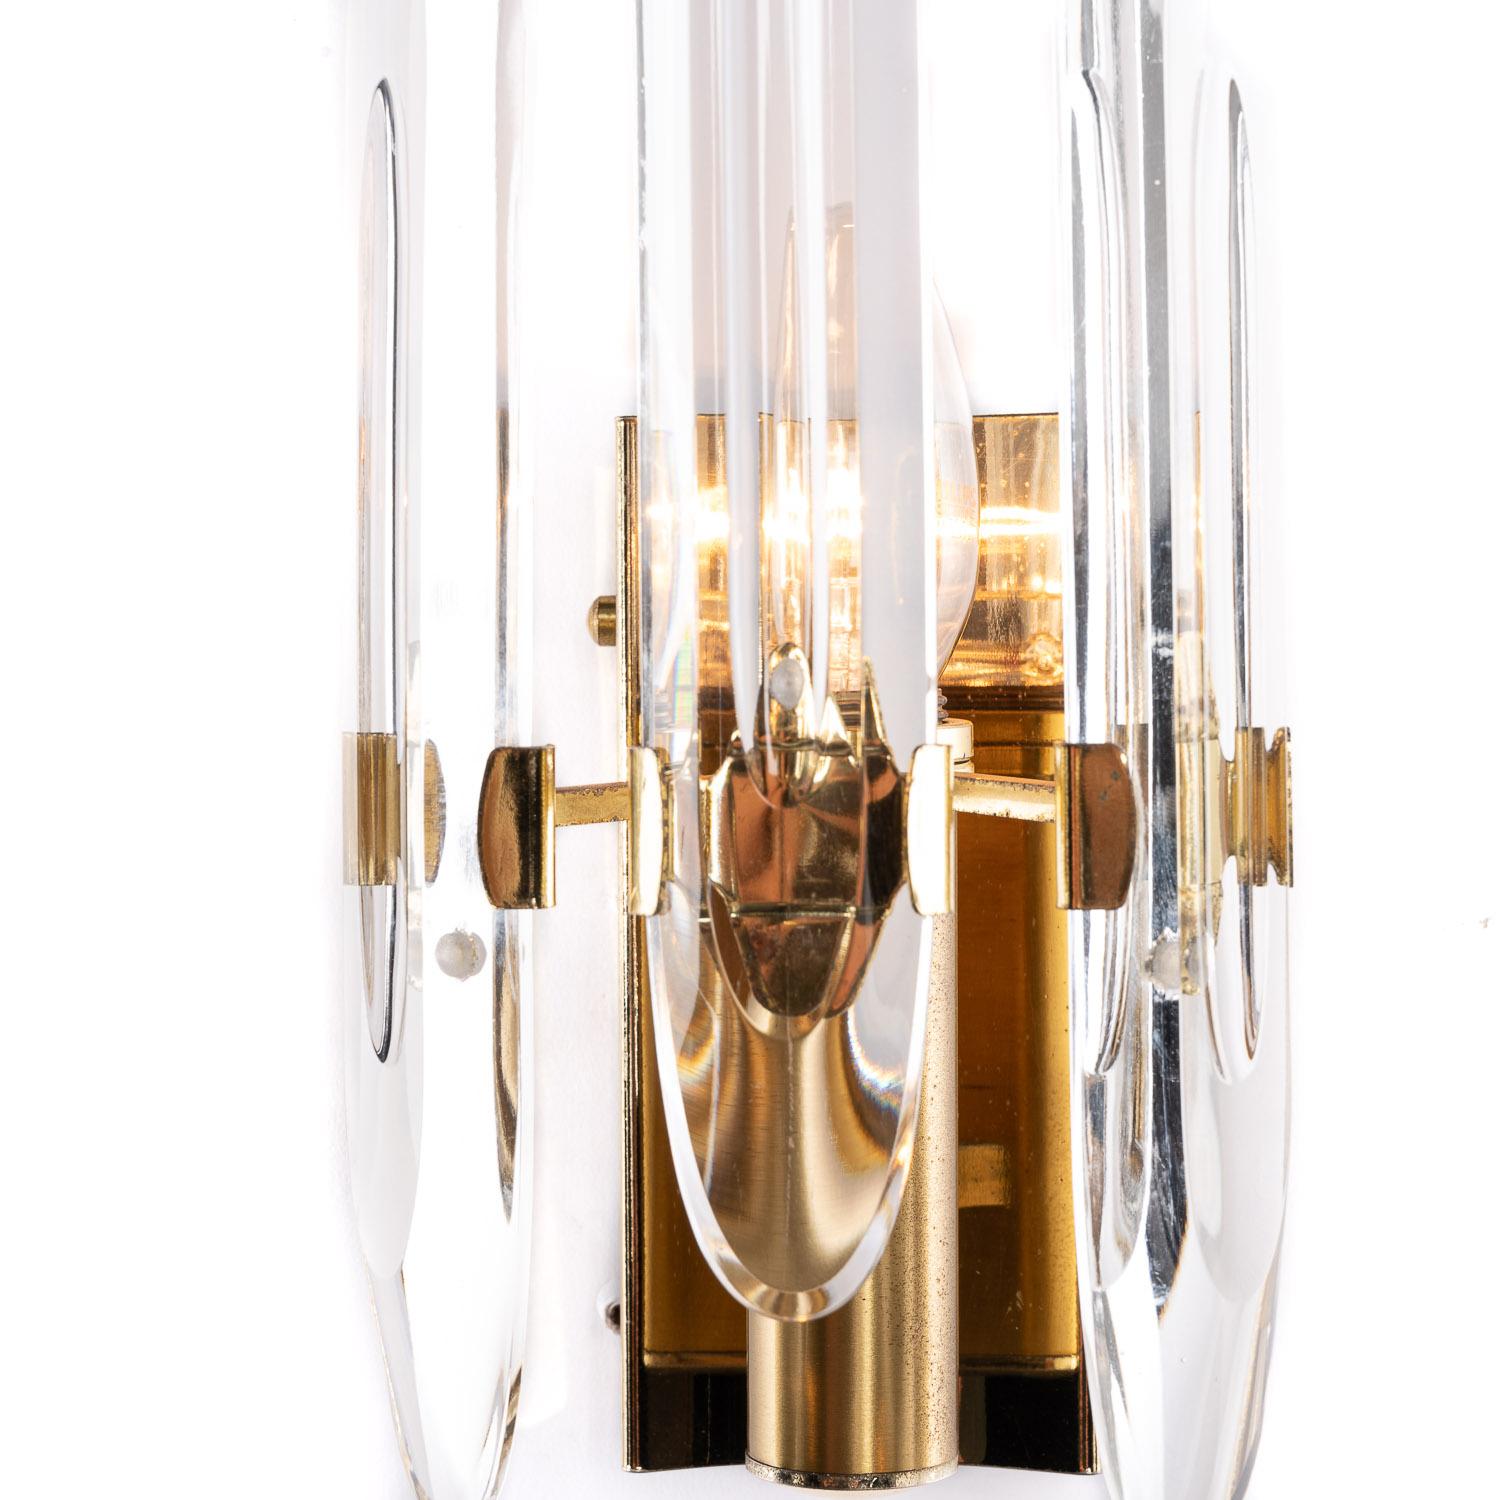 Classic 1970s Italian Gaetano Sciolari design Sconces with characteristic use of crystal glass and brass frame. Some are weathered frames. 

In full working condition and ready to use. Equipped with European wiring, it can support voltage up to